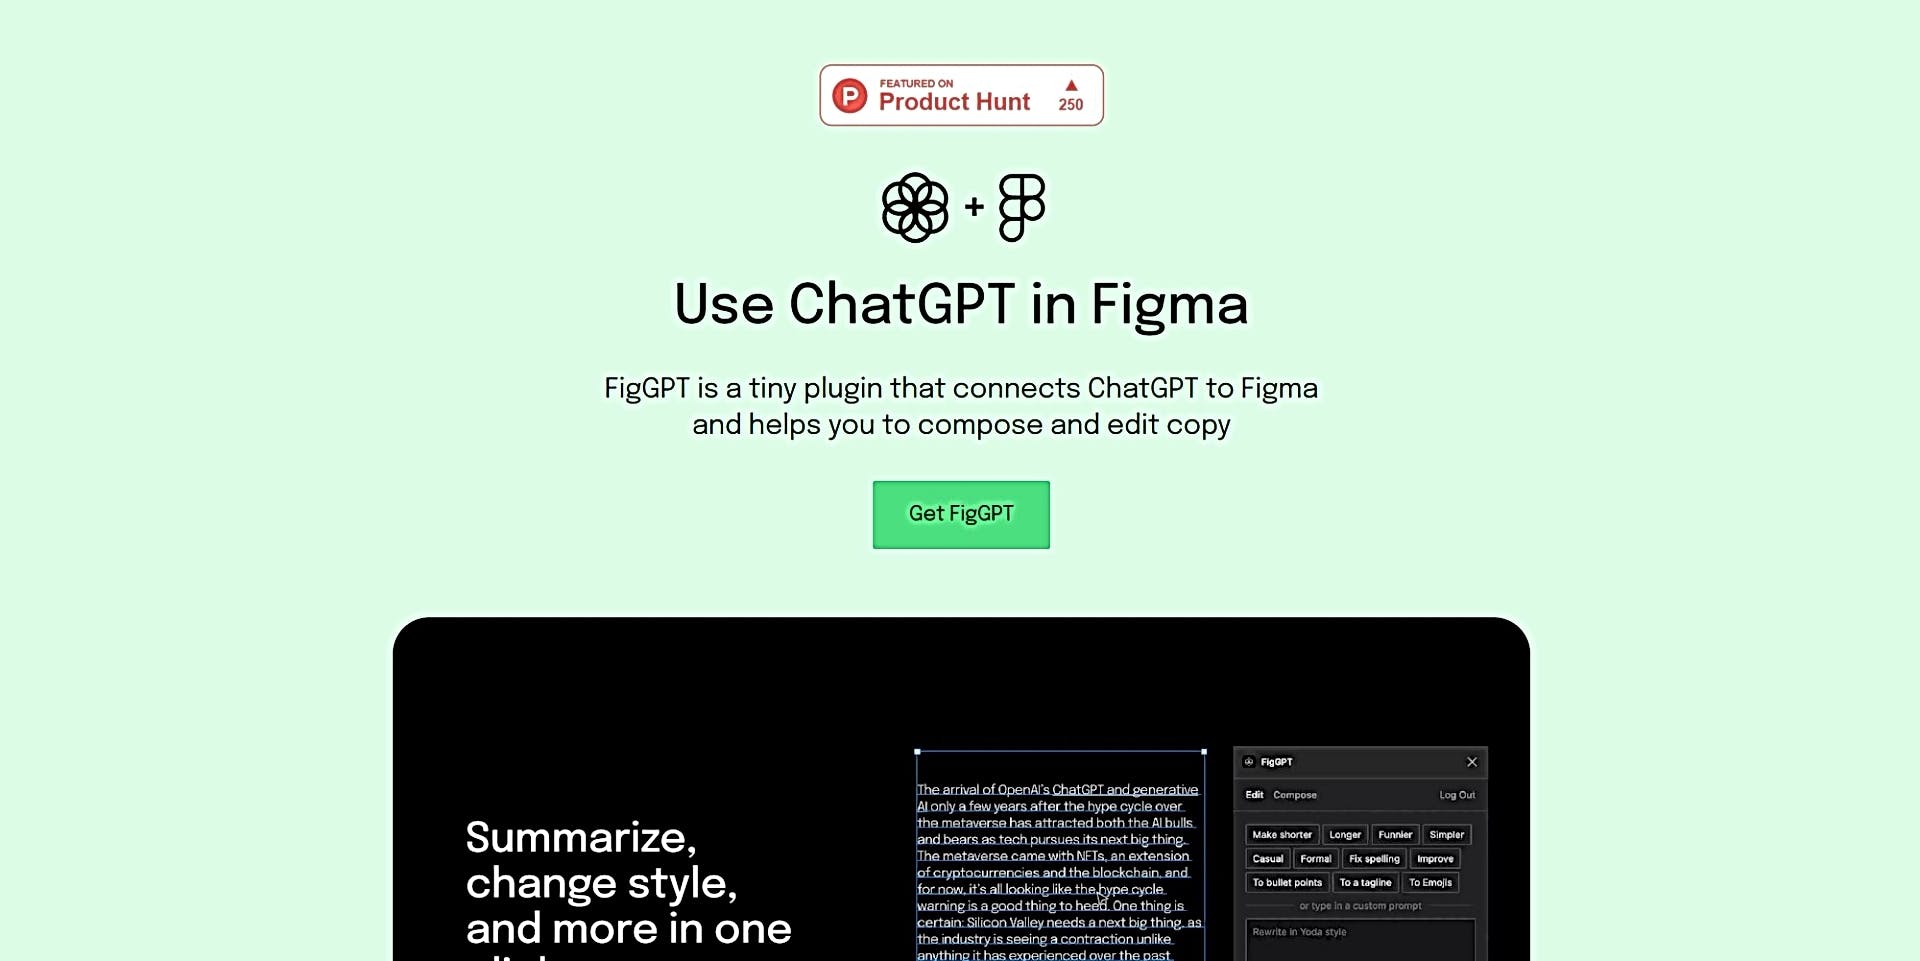 FigGPT featured